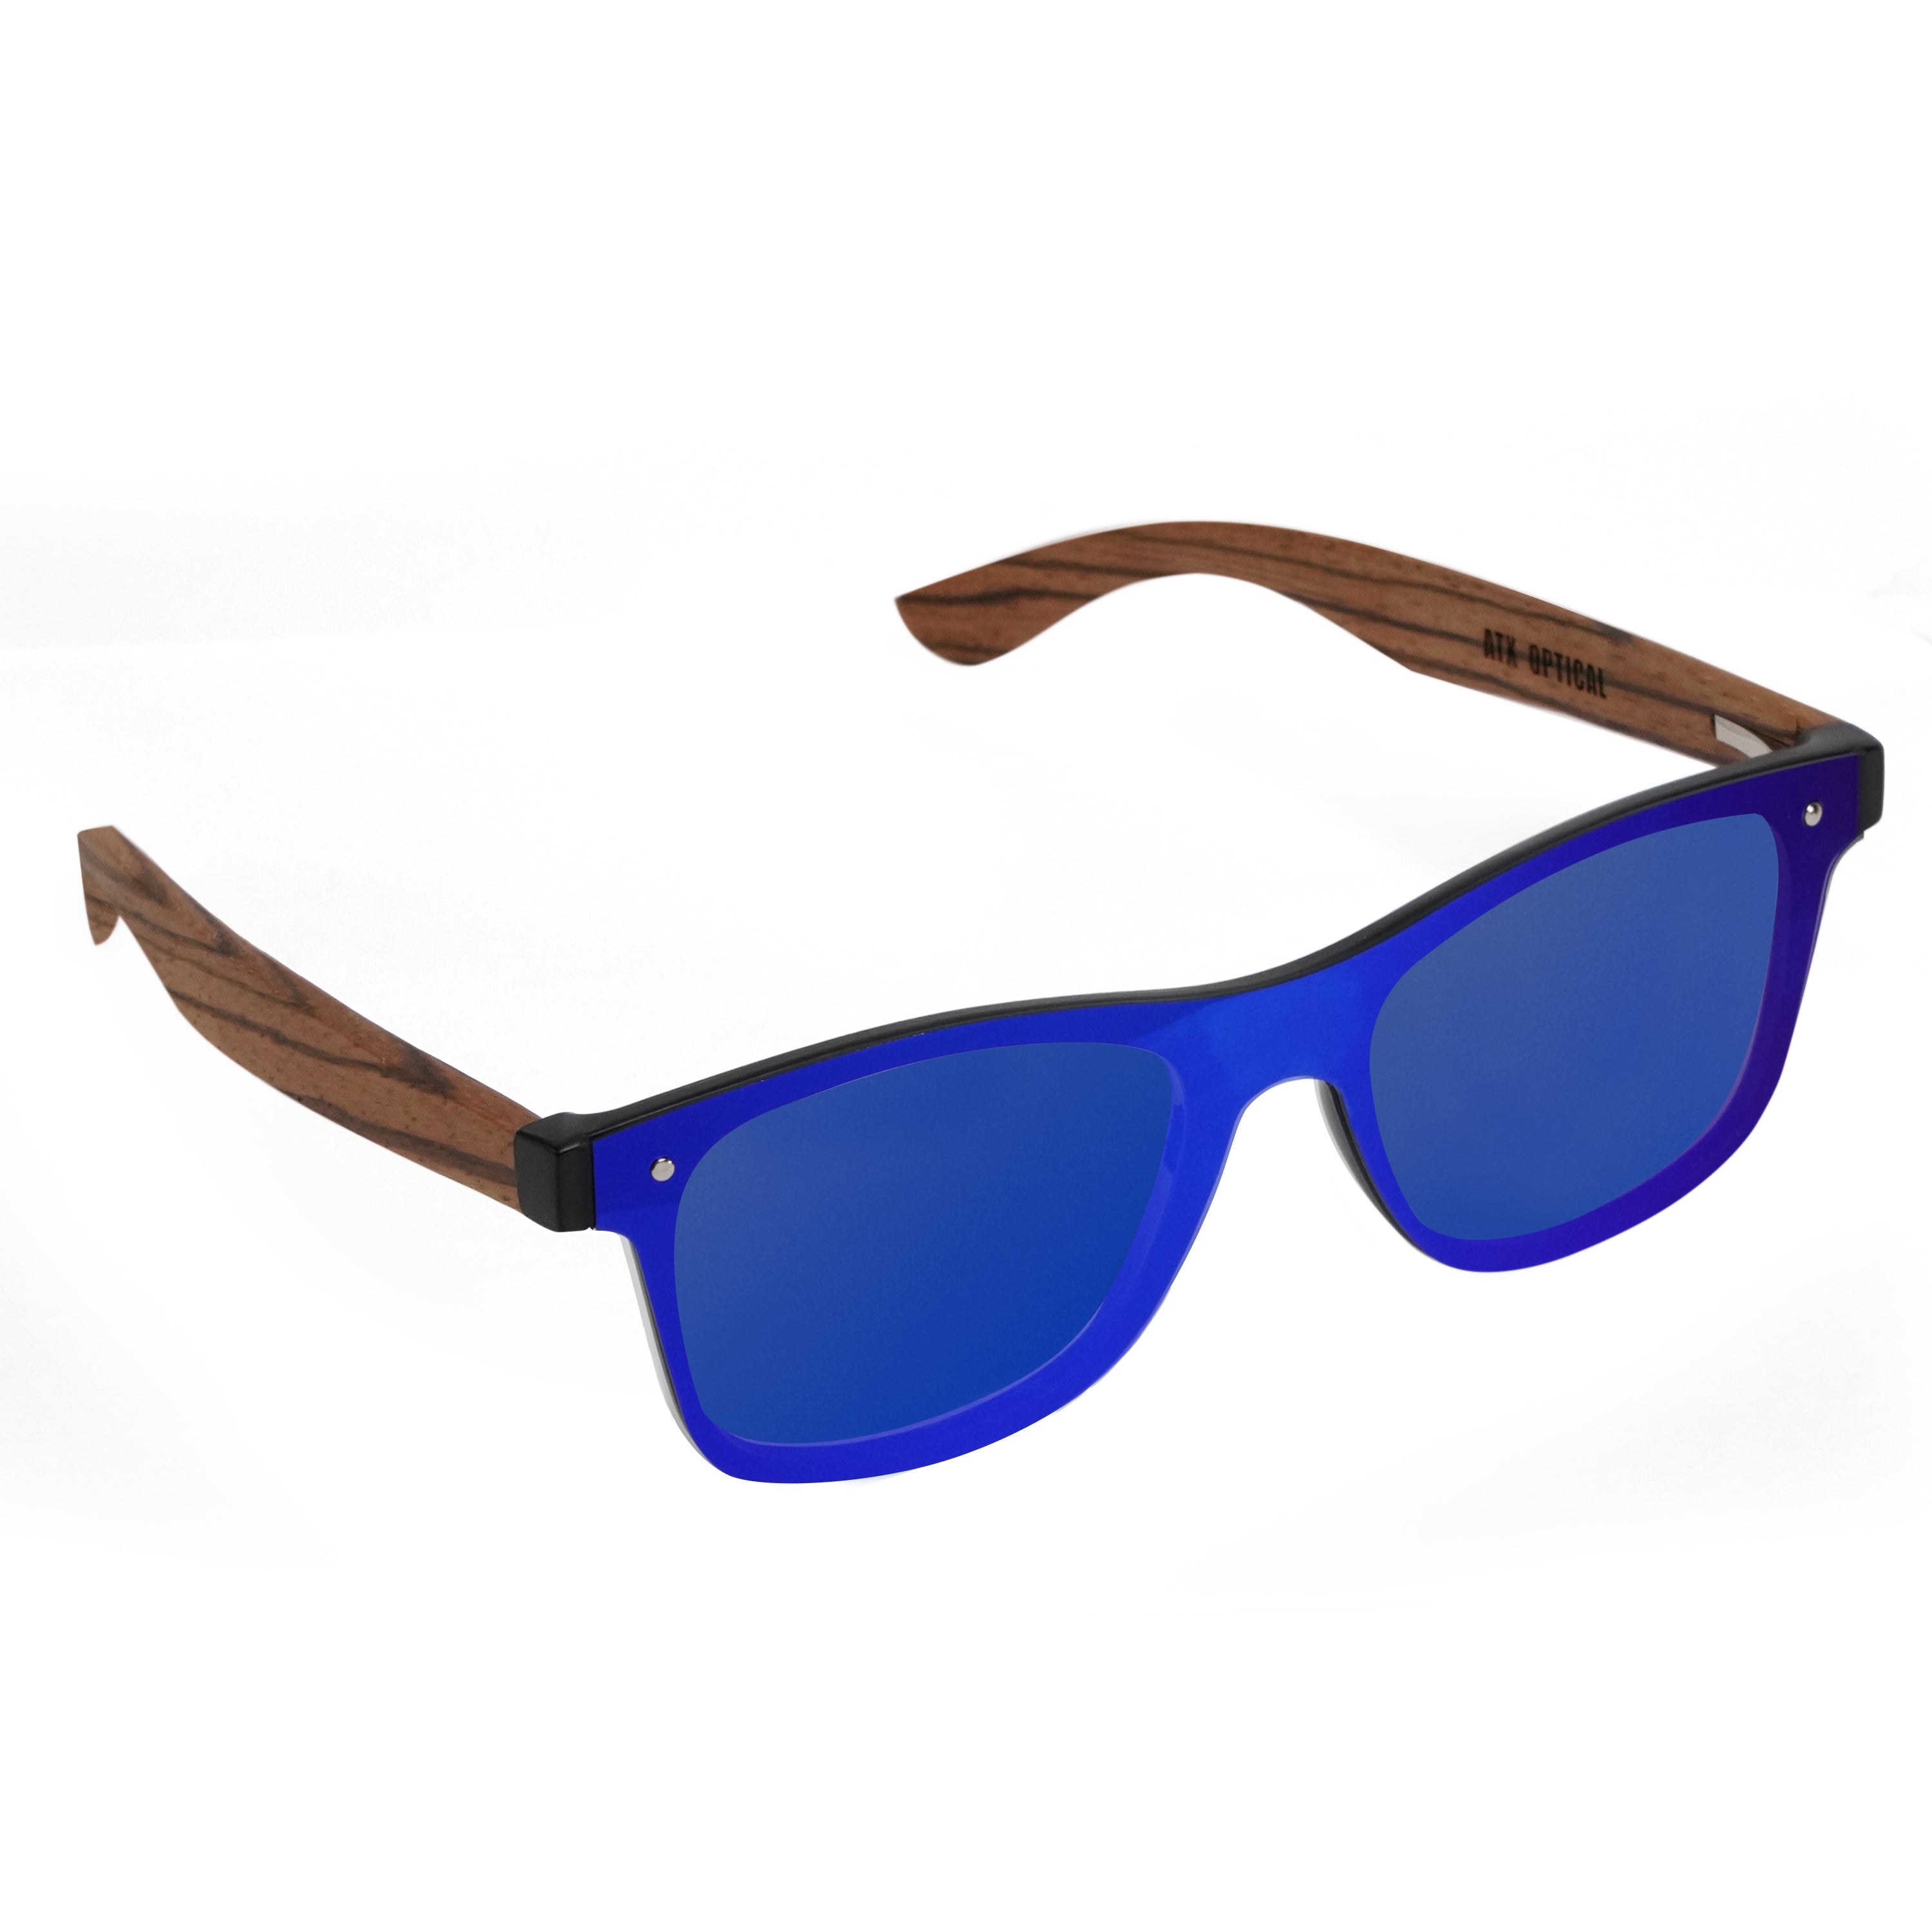 XXL Mens Extra Large Wooden Classic Polarized Sunglasses for Big Wide Heads 155mm One Piece Lens by ATX Optical Zebra / Blue